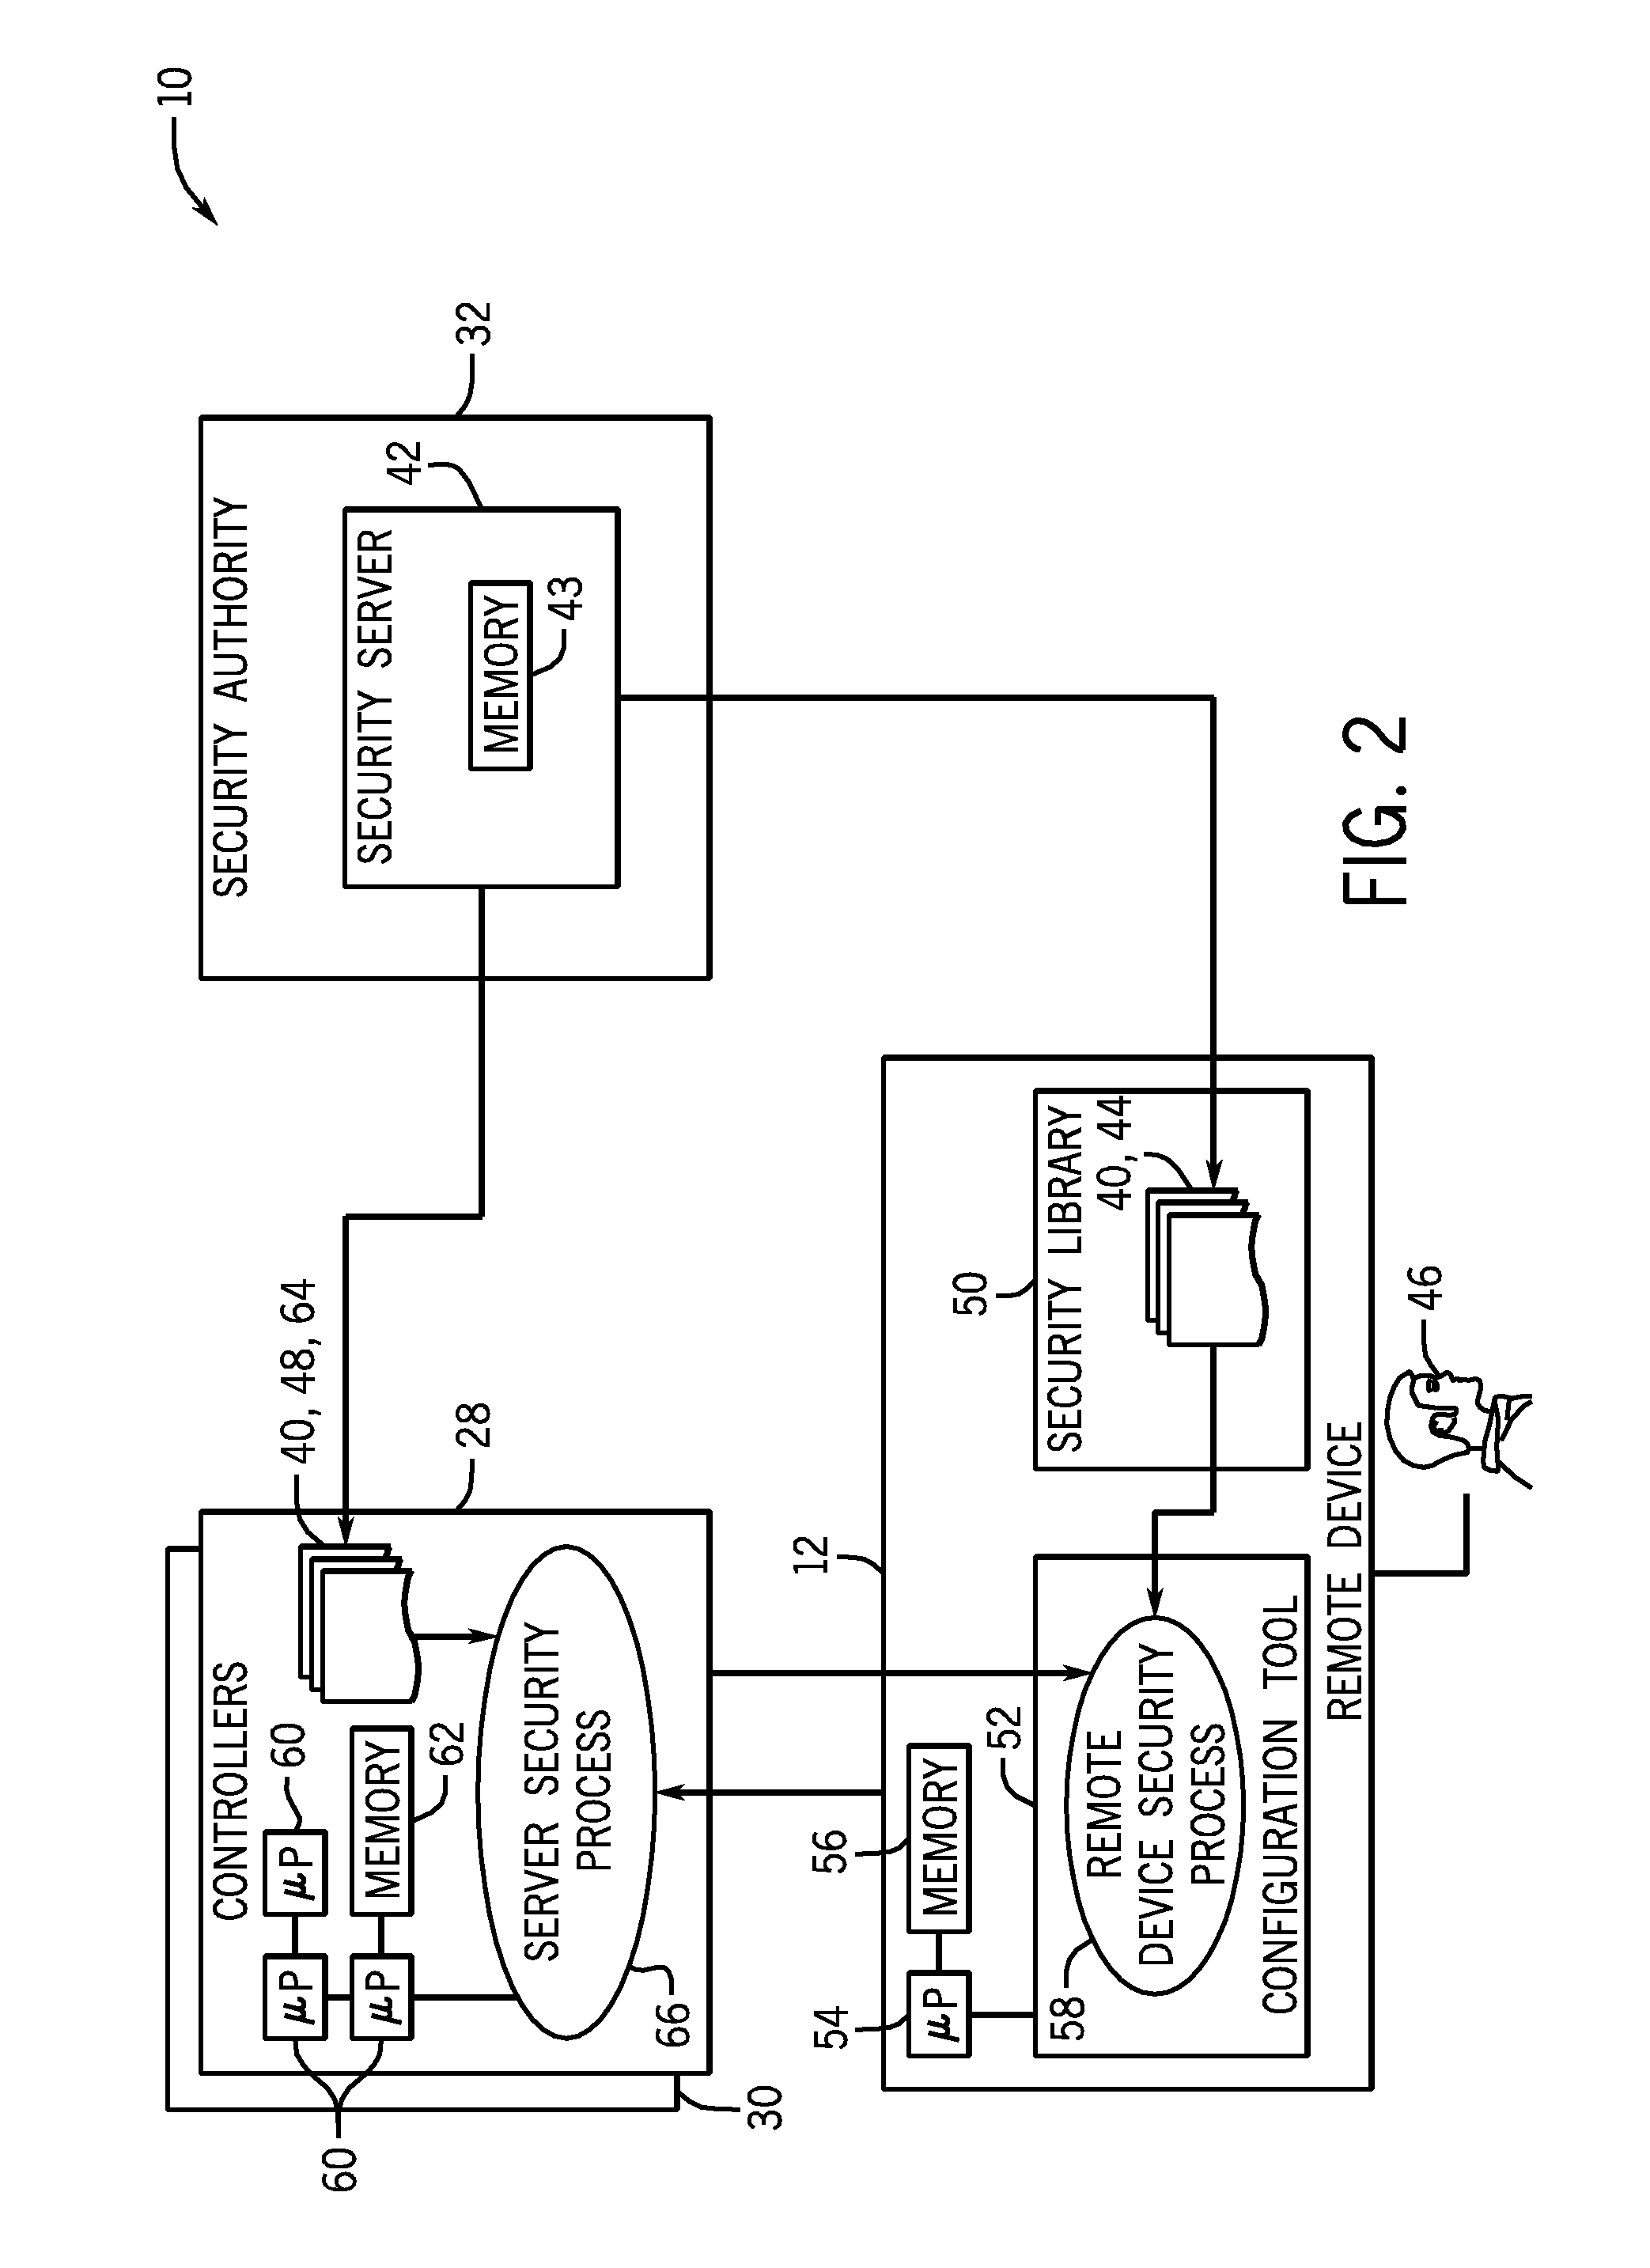 System and method for securing controllers